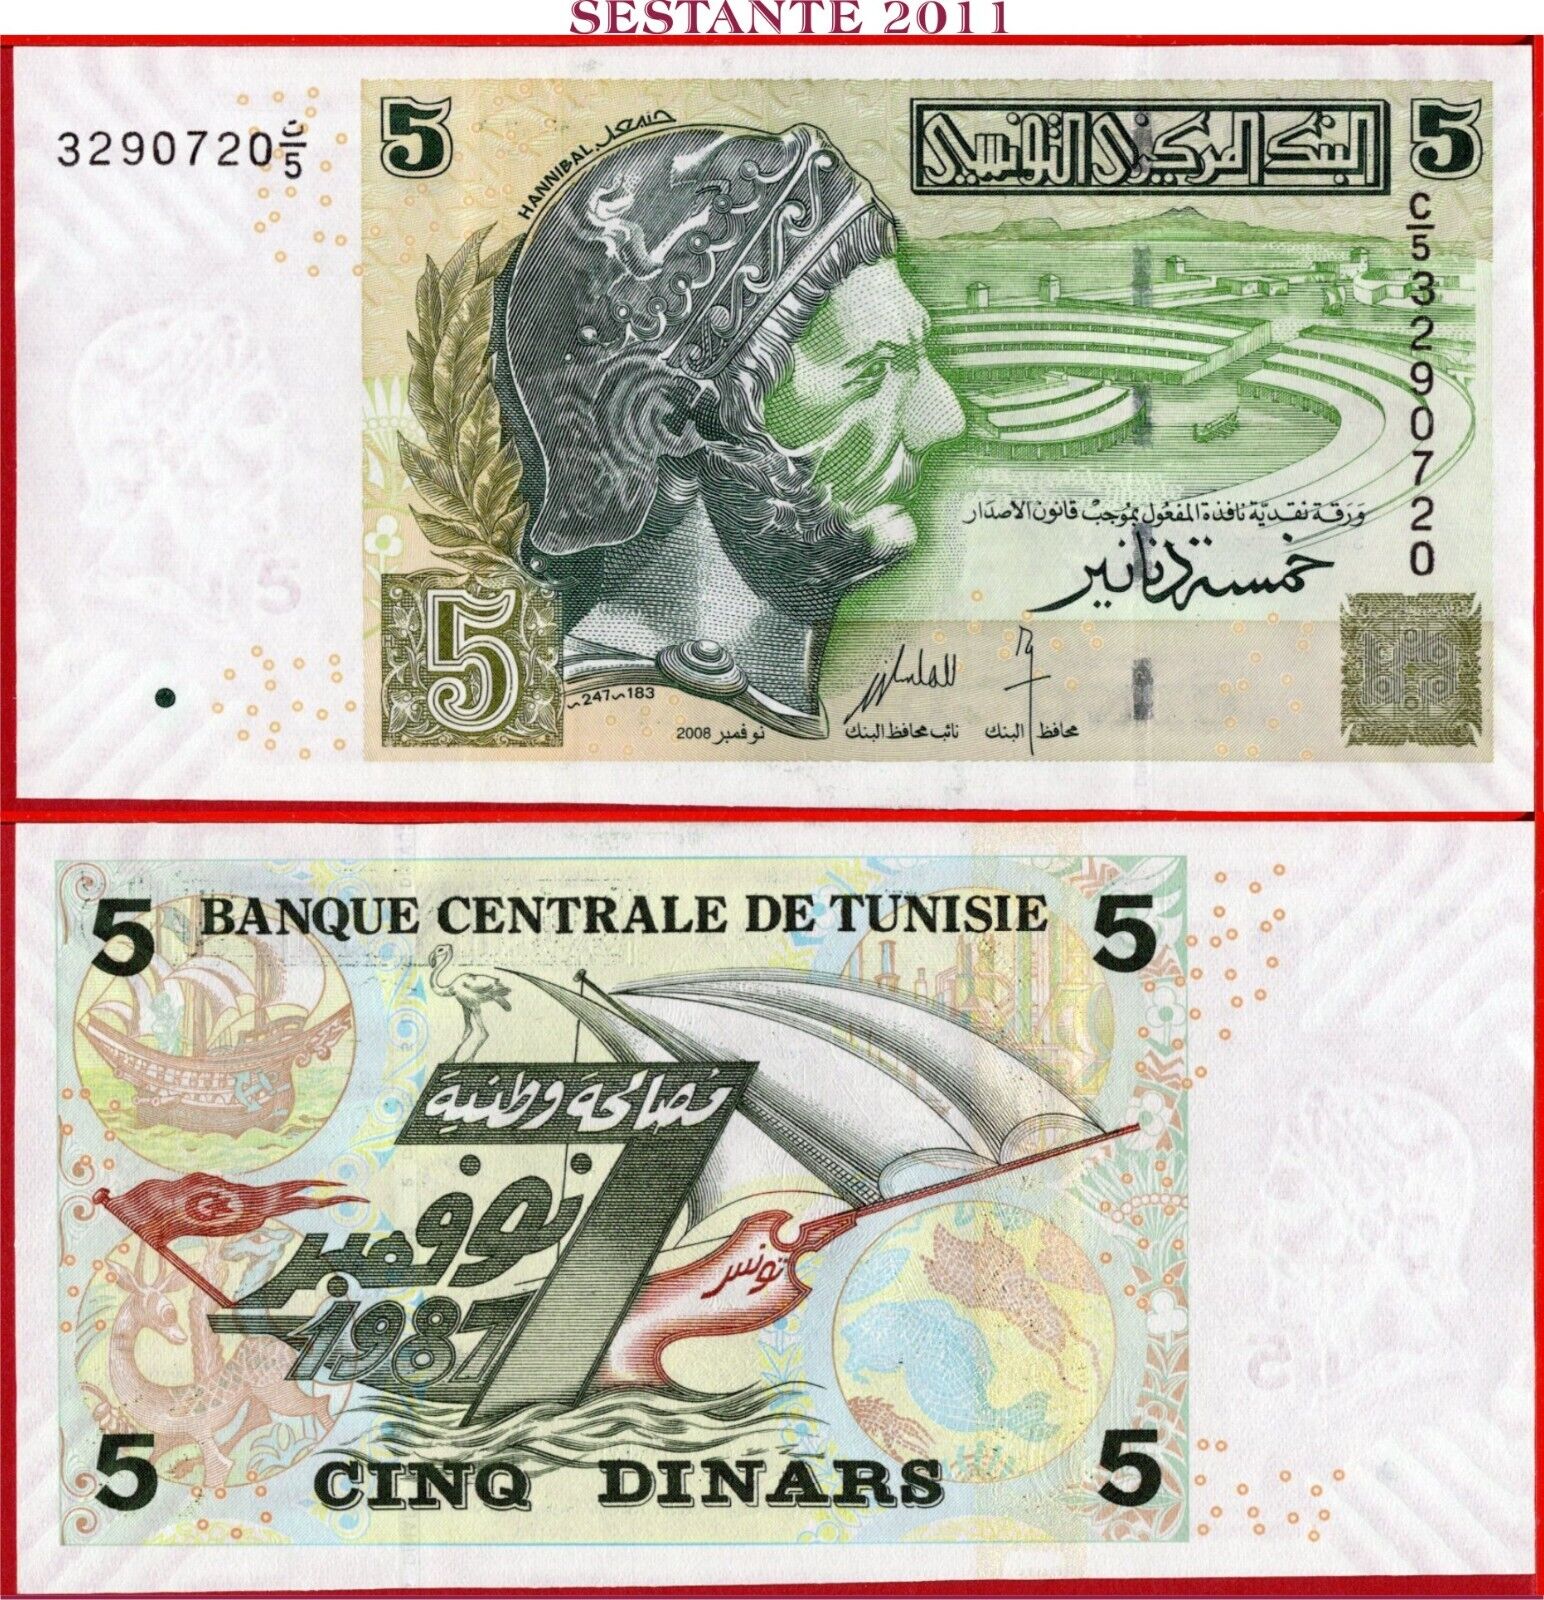 $ Tunisia - 5 Dinars 2008 - P 92 - Unc; Free Shipping From 100$